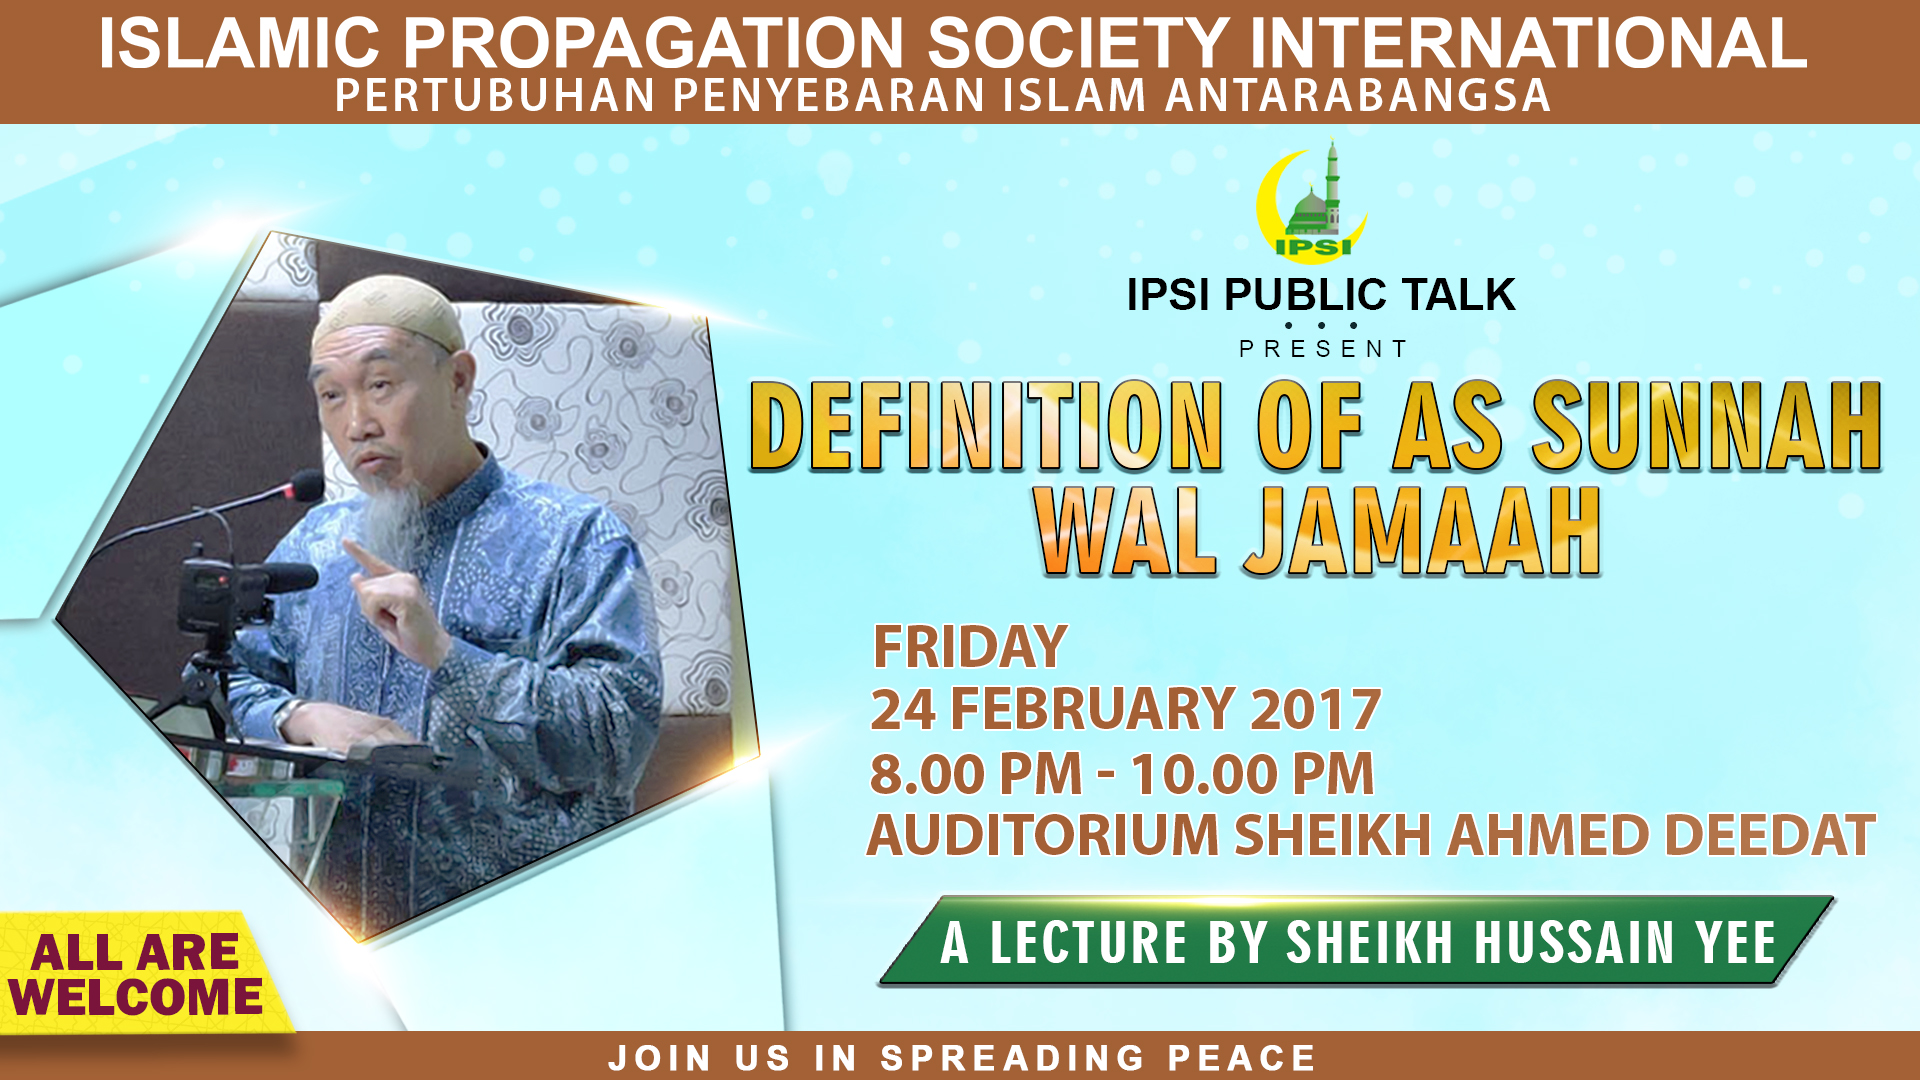 You are currently viewing DEFINITION OF AS SUNNAH WAL JAMAAH – SHEIKH HUSSAIN YEE